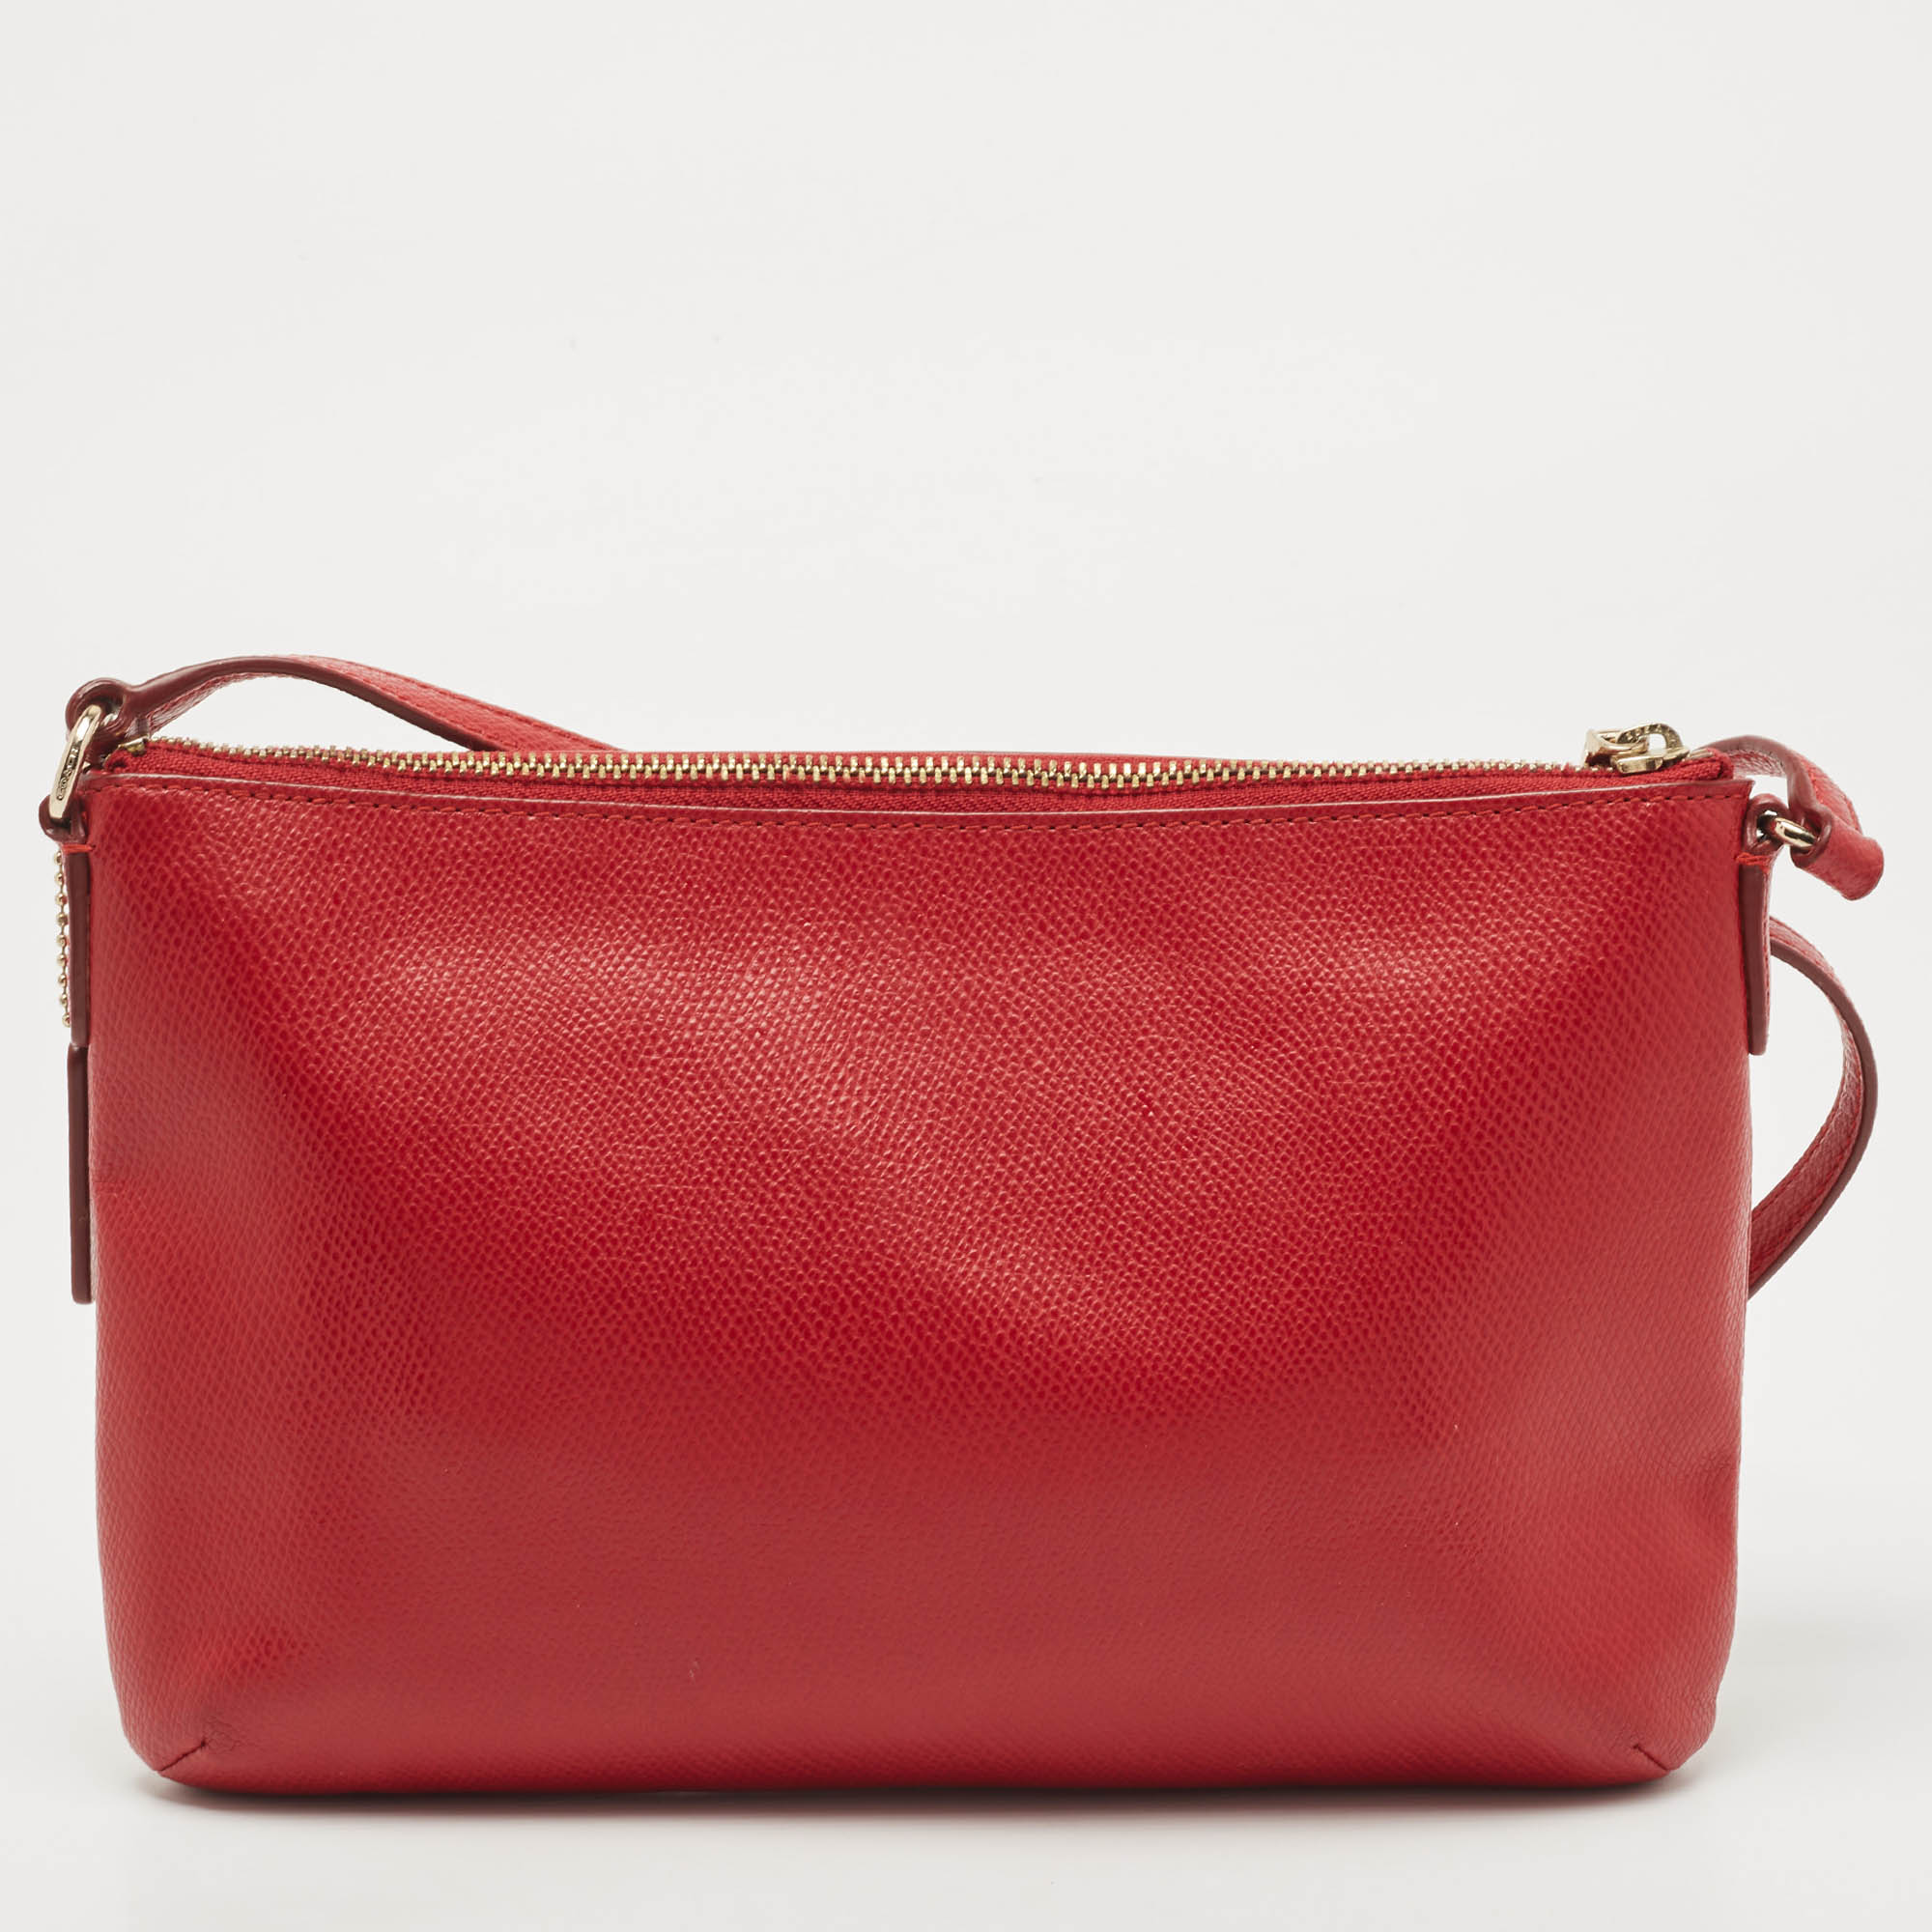 Coach Red Leather East/West Swingpack Crossbody Bag